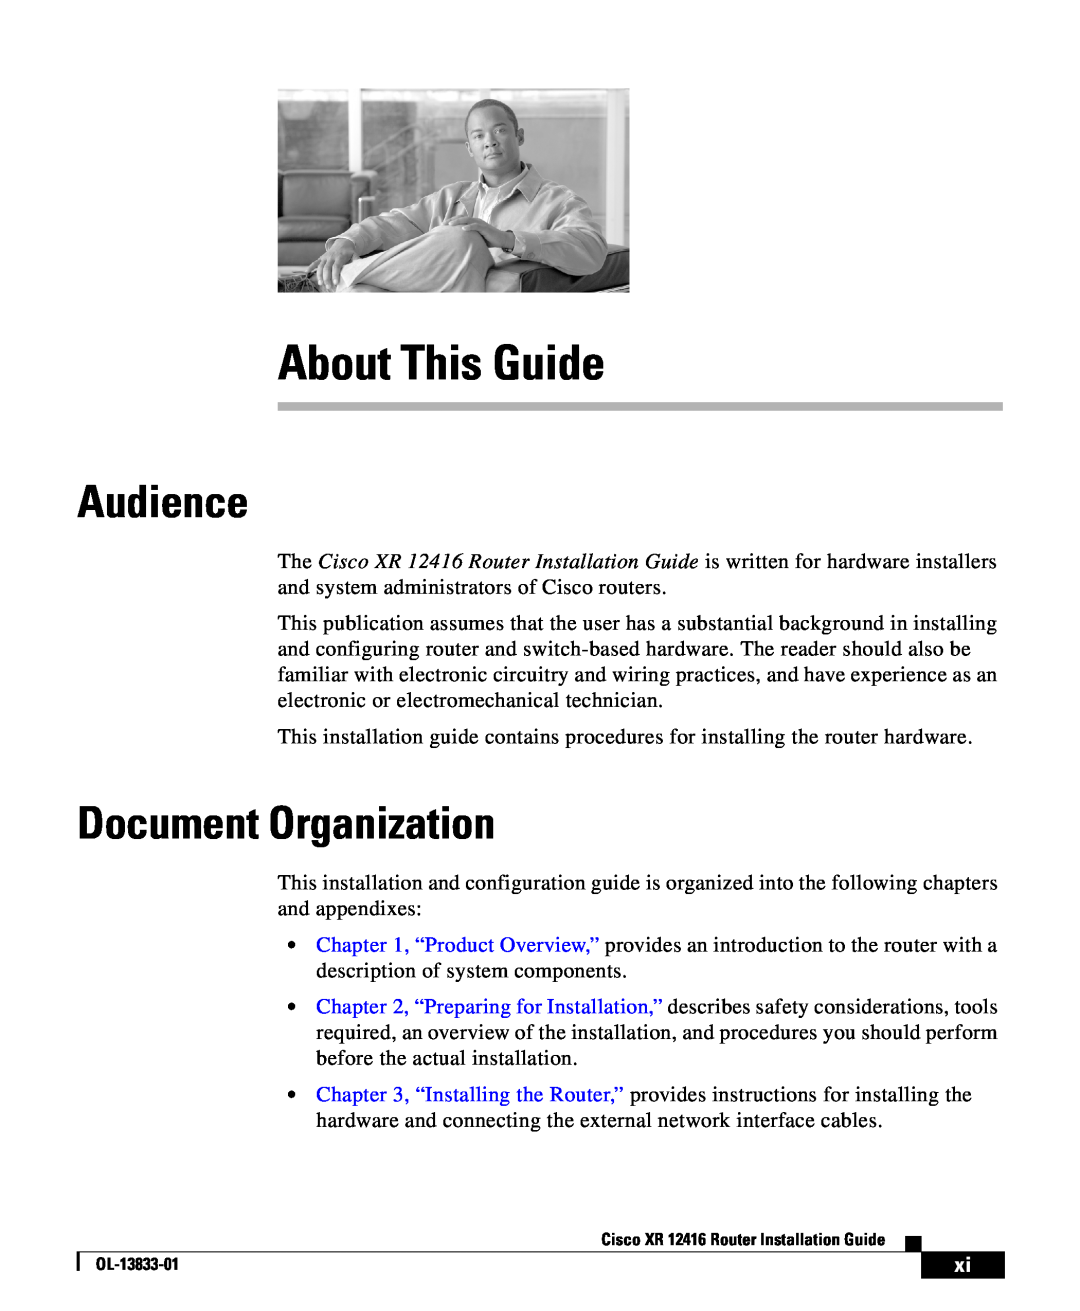 Cisco Systems XR 12416 appendix Audience, Document Organization, About This Guide 